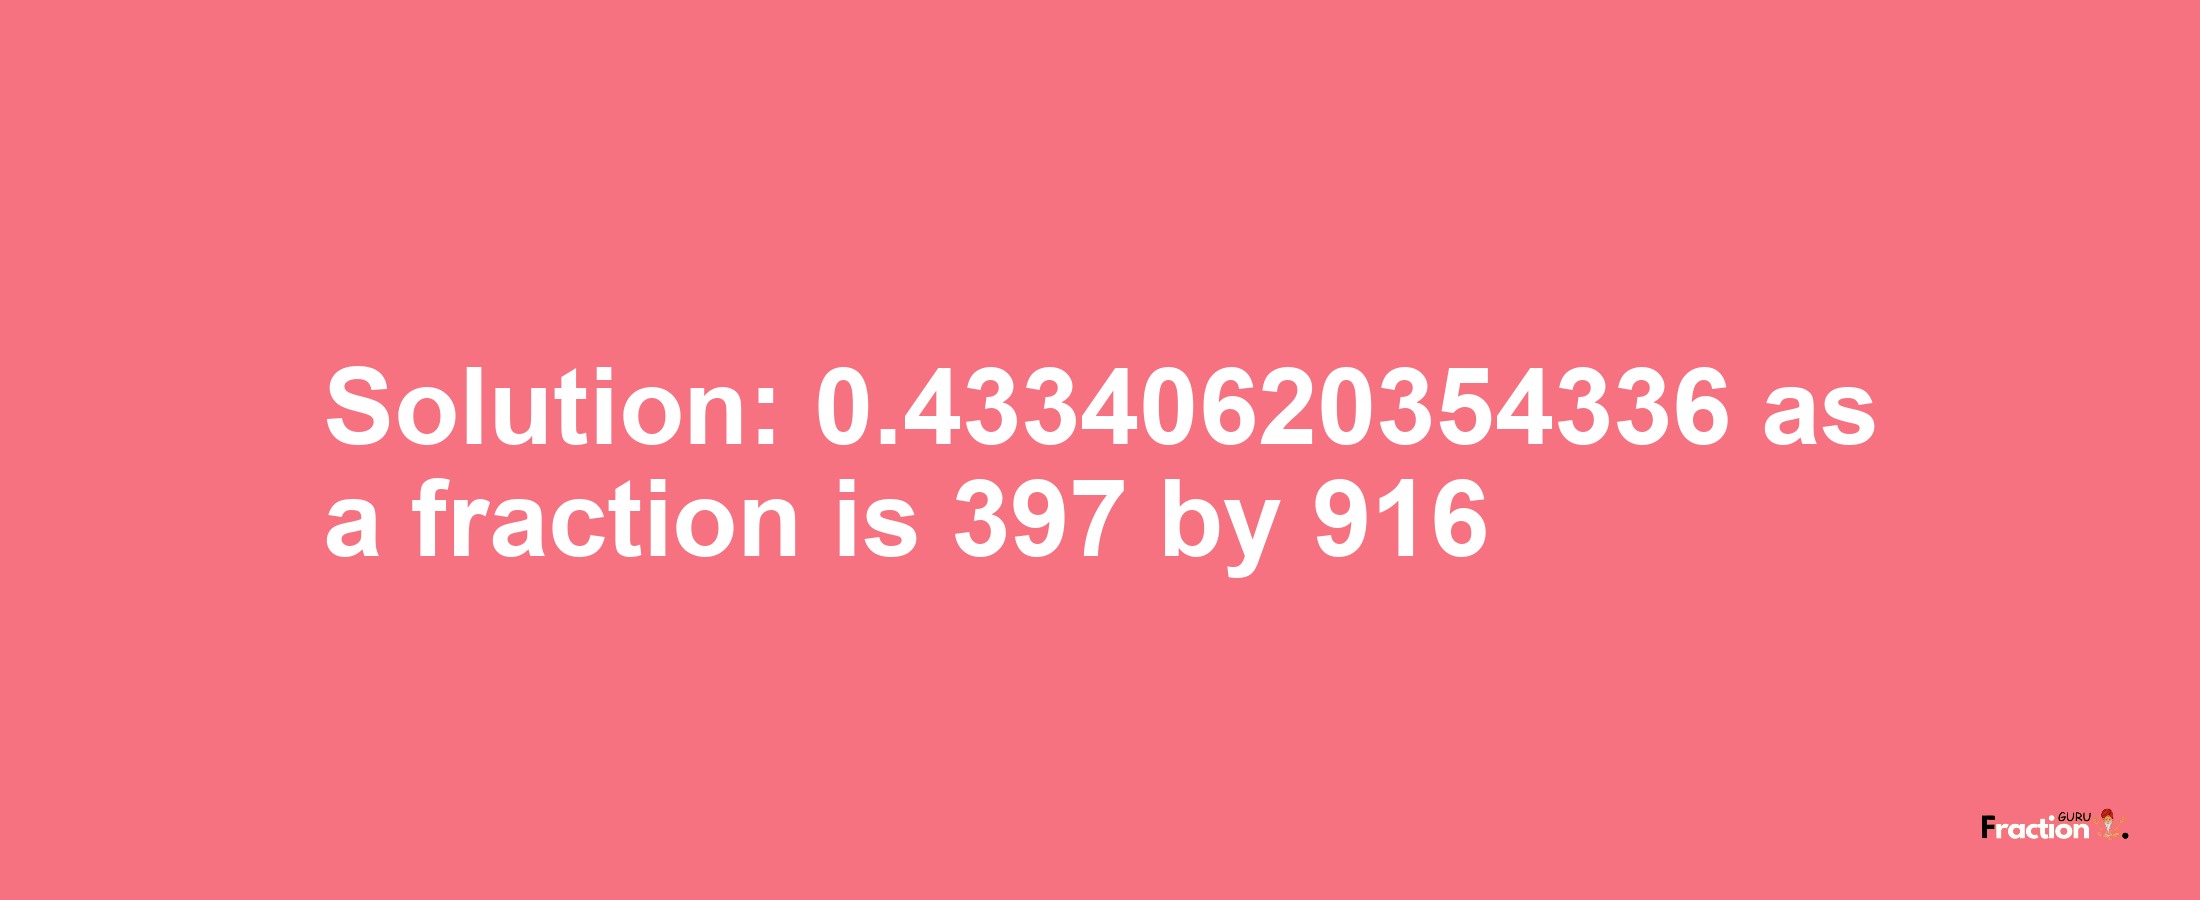 Solution:0.43340620354336 as a fraction is 397/916